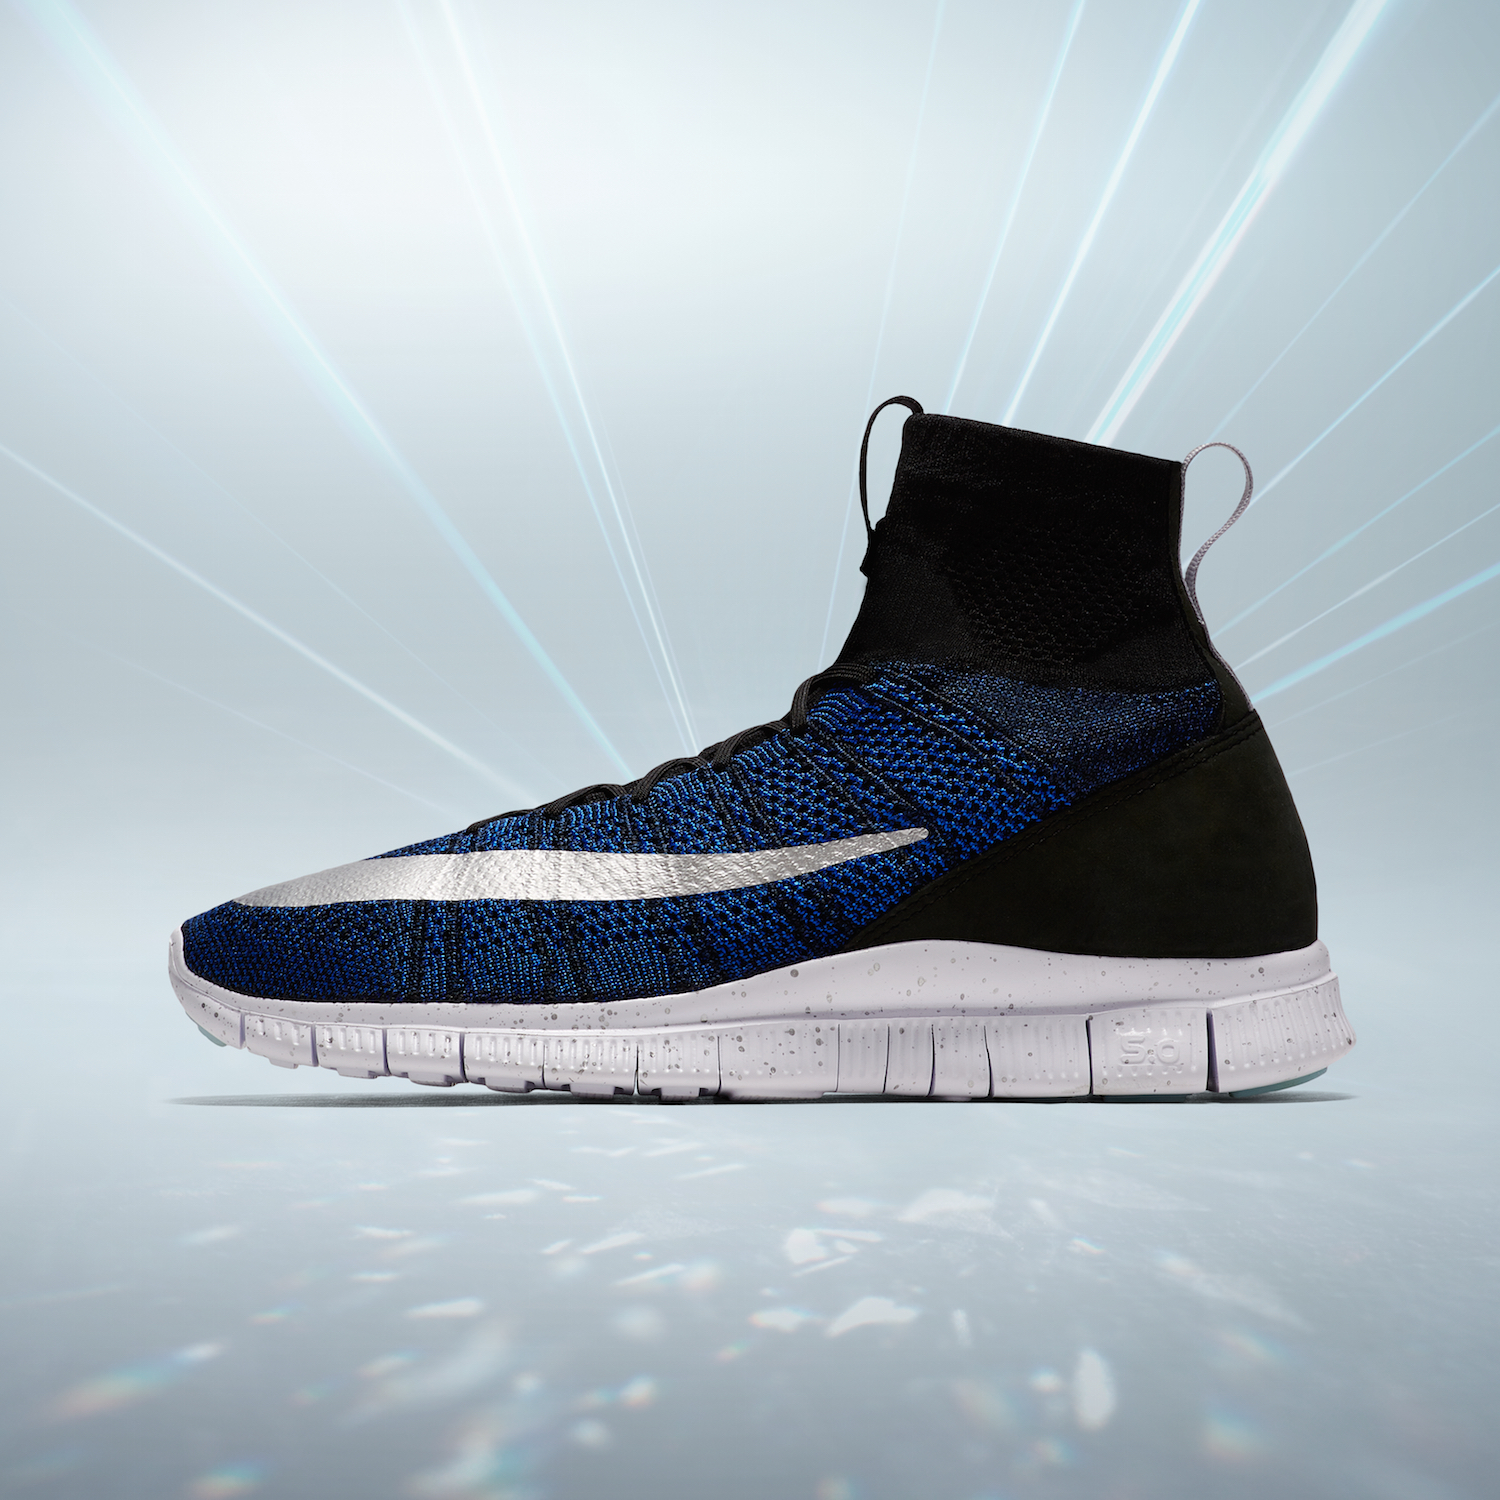 The CR7 Nike Free Mercurial Superfly is 